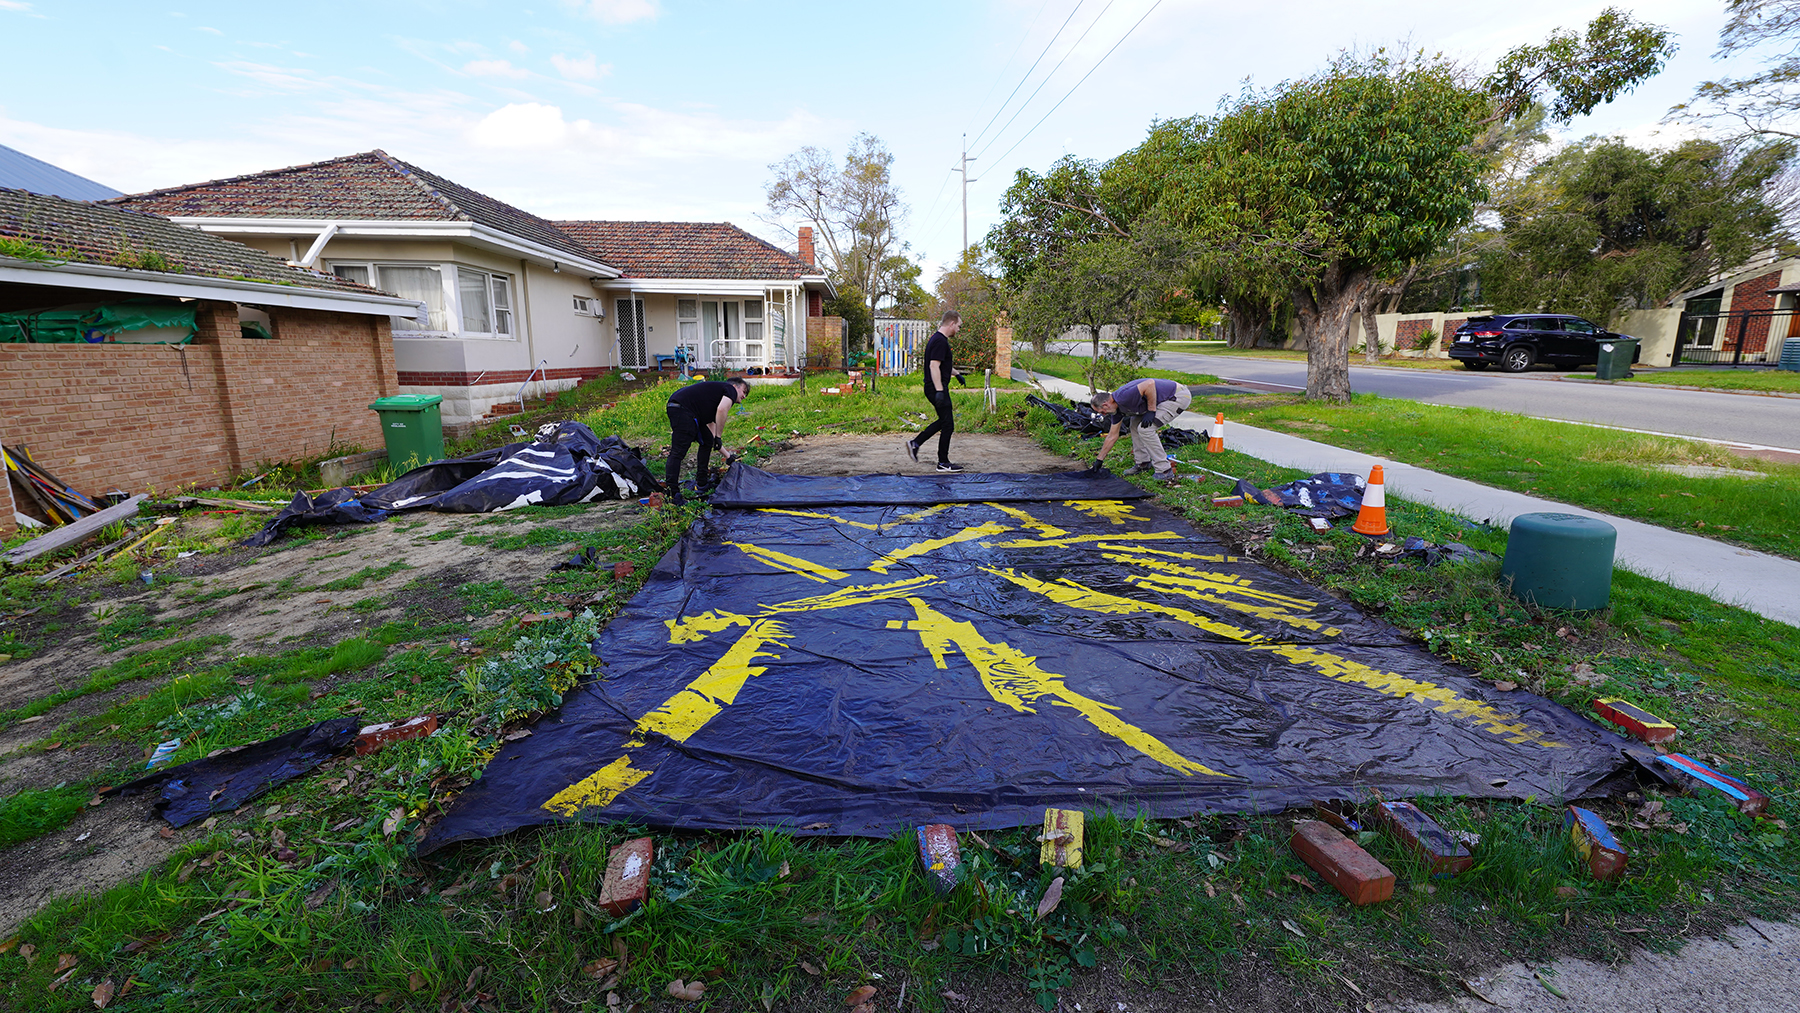 Photograph of a front lawn with a large black painting being unfolded by three people